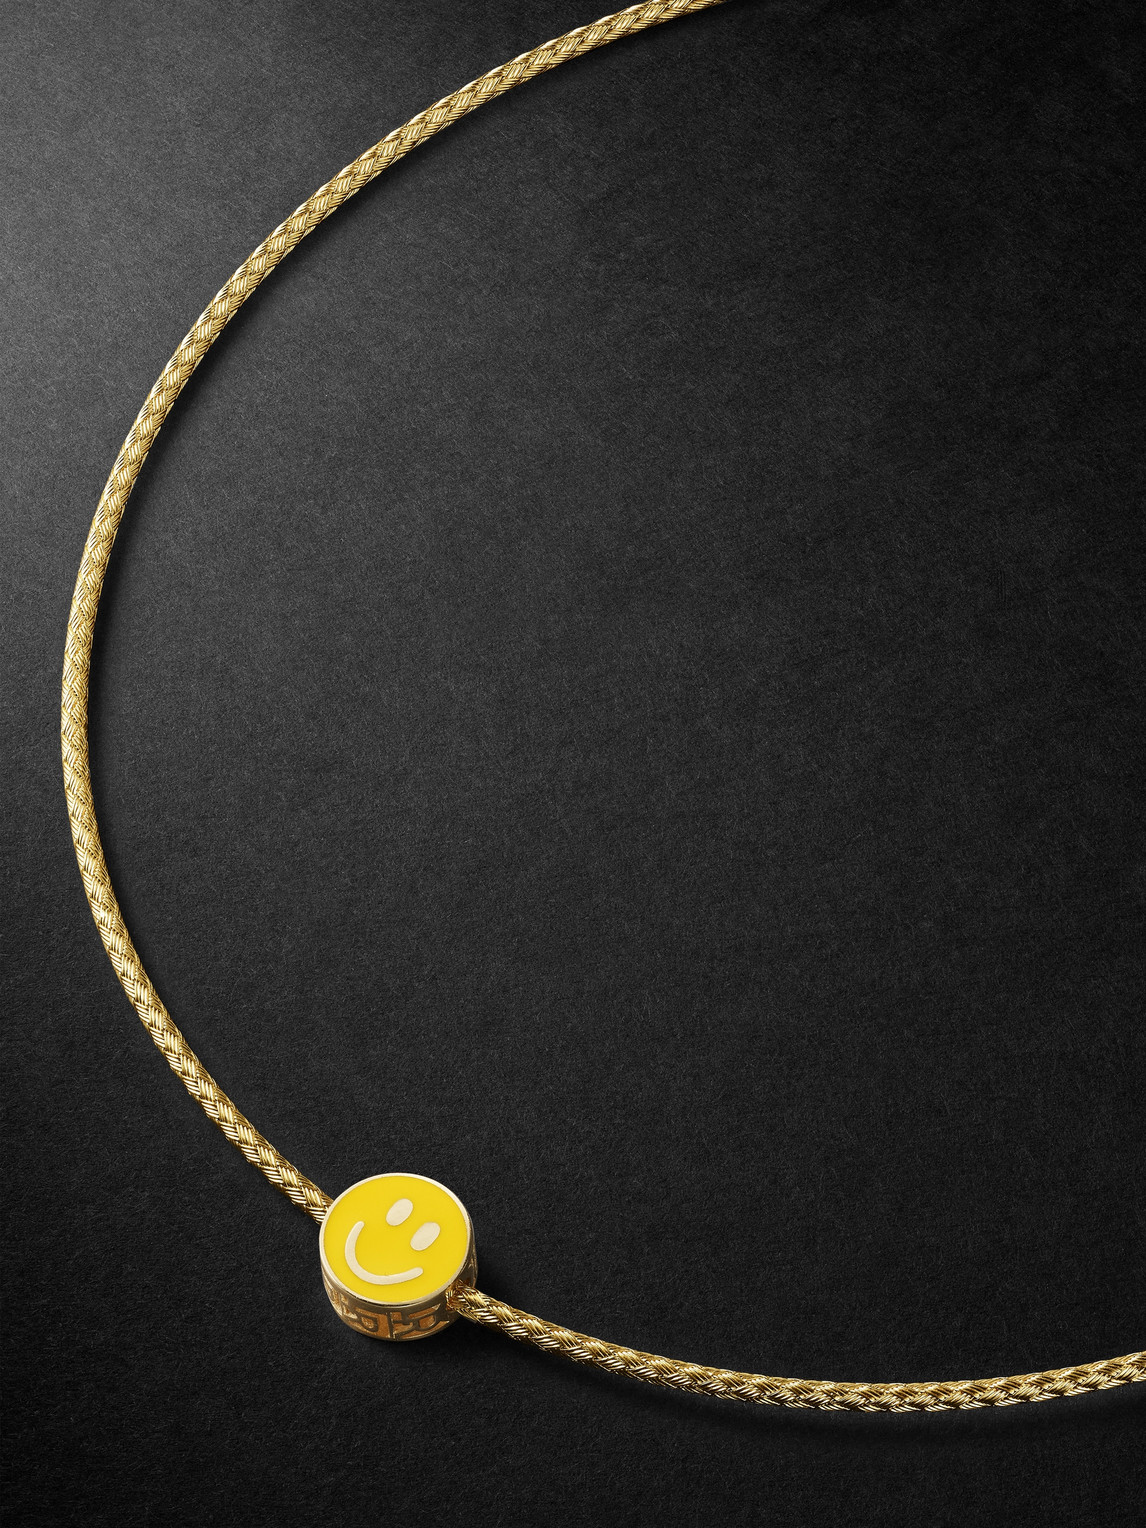 Gold and Enamel Pendant Necklace